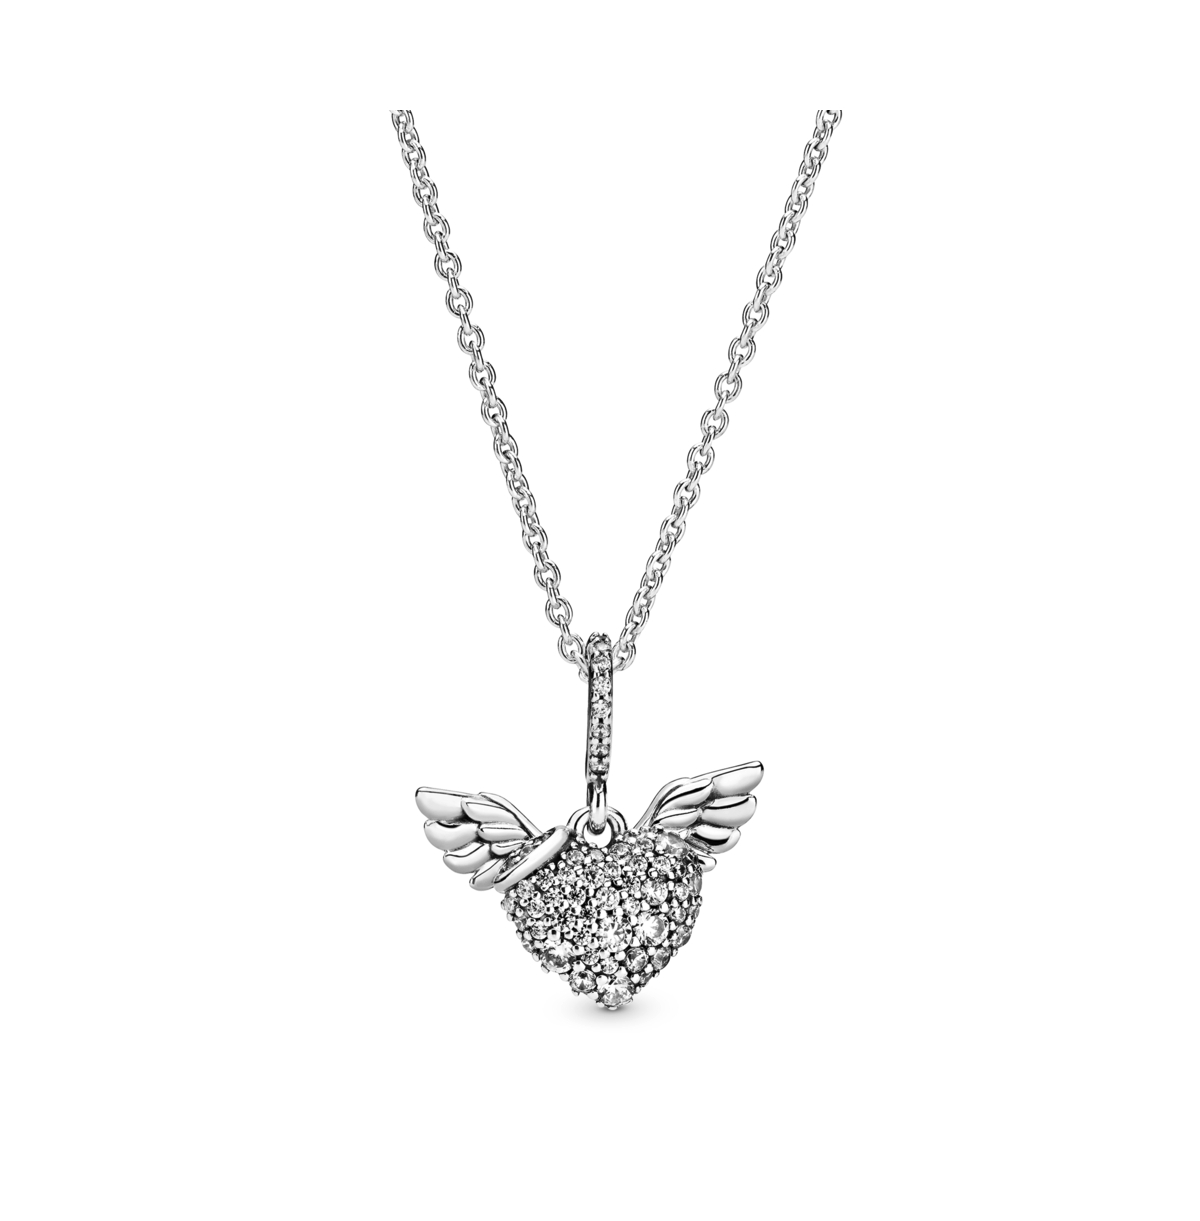 Pandora Moment Sterling Silver Pave Cubic Zirconia Heart And Angel Wings Necklace